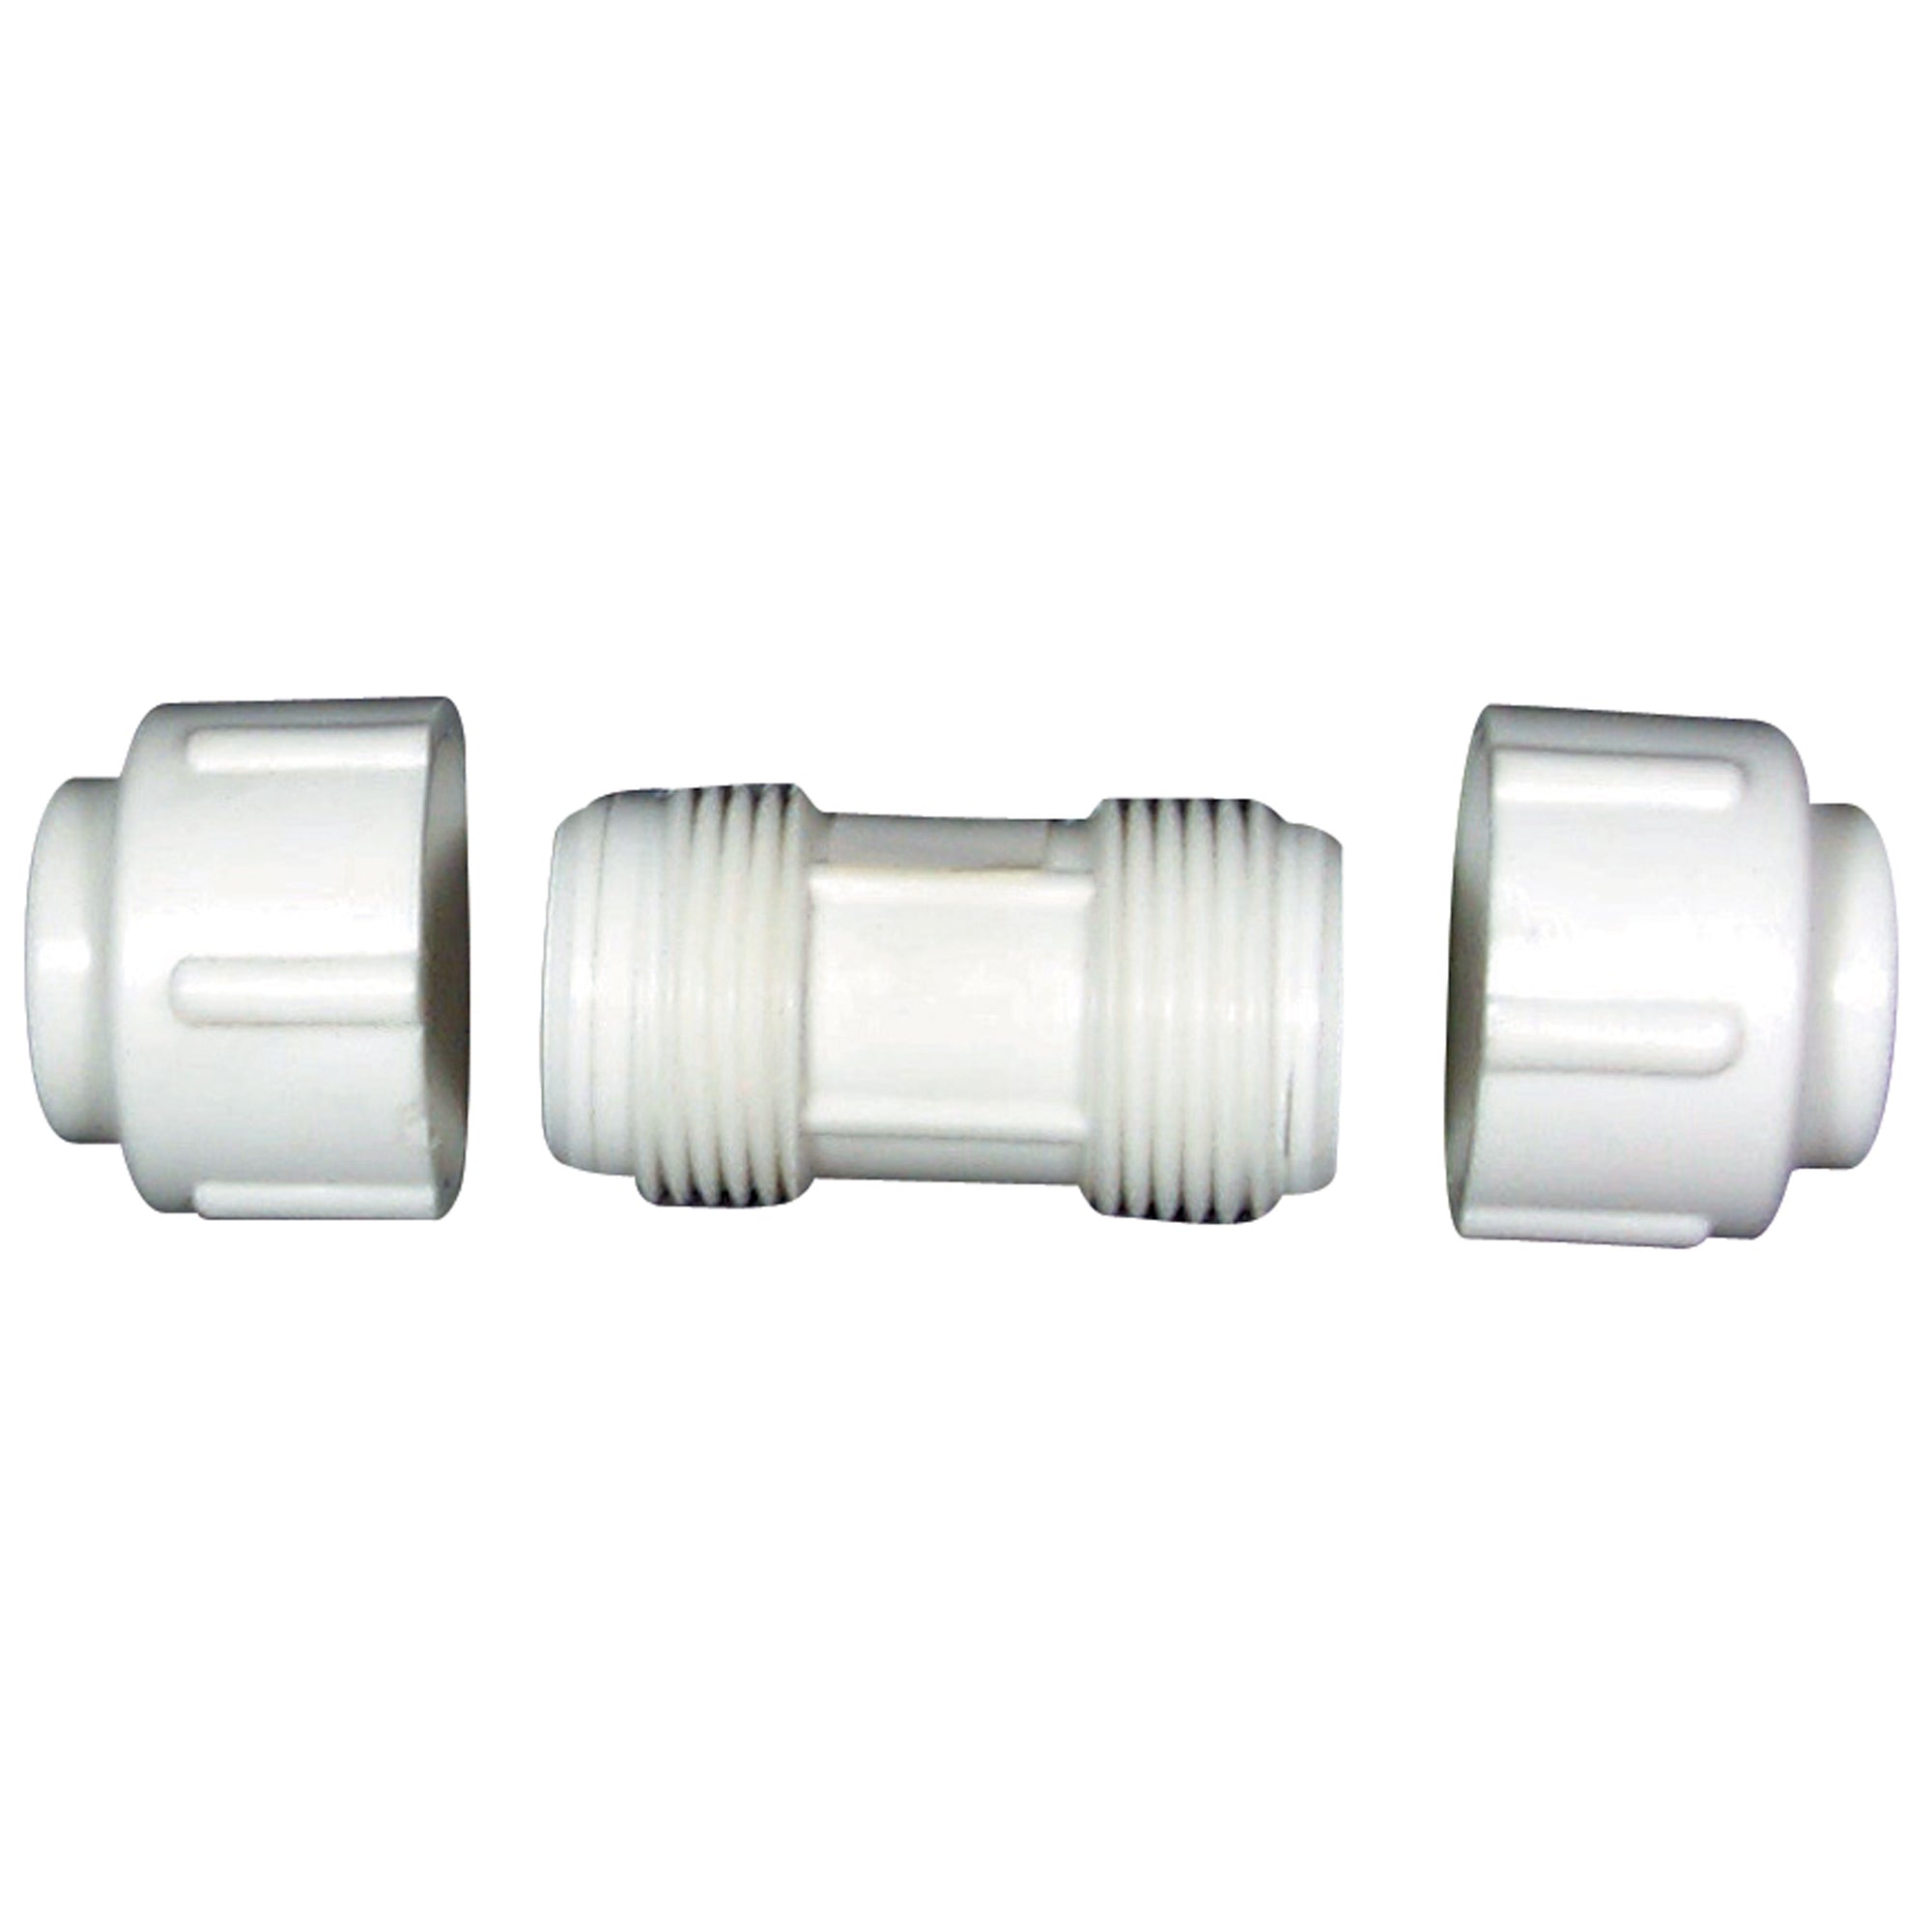 Flair-It 16347 Transition Fitting 7/8" OD